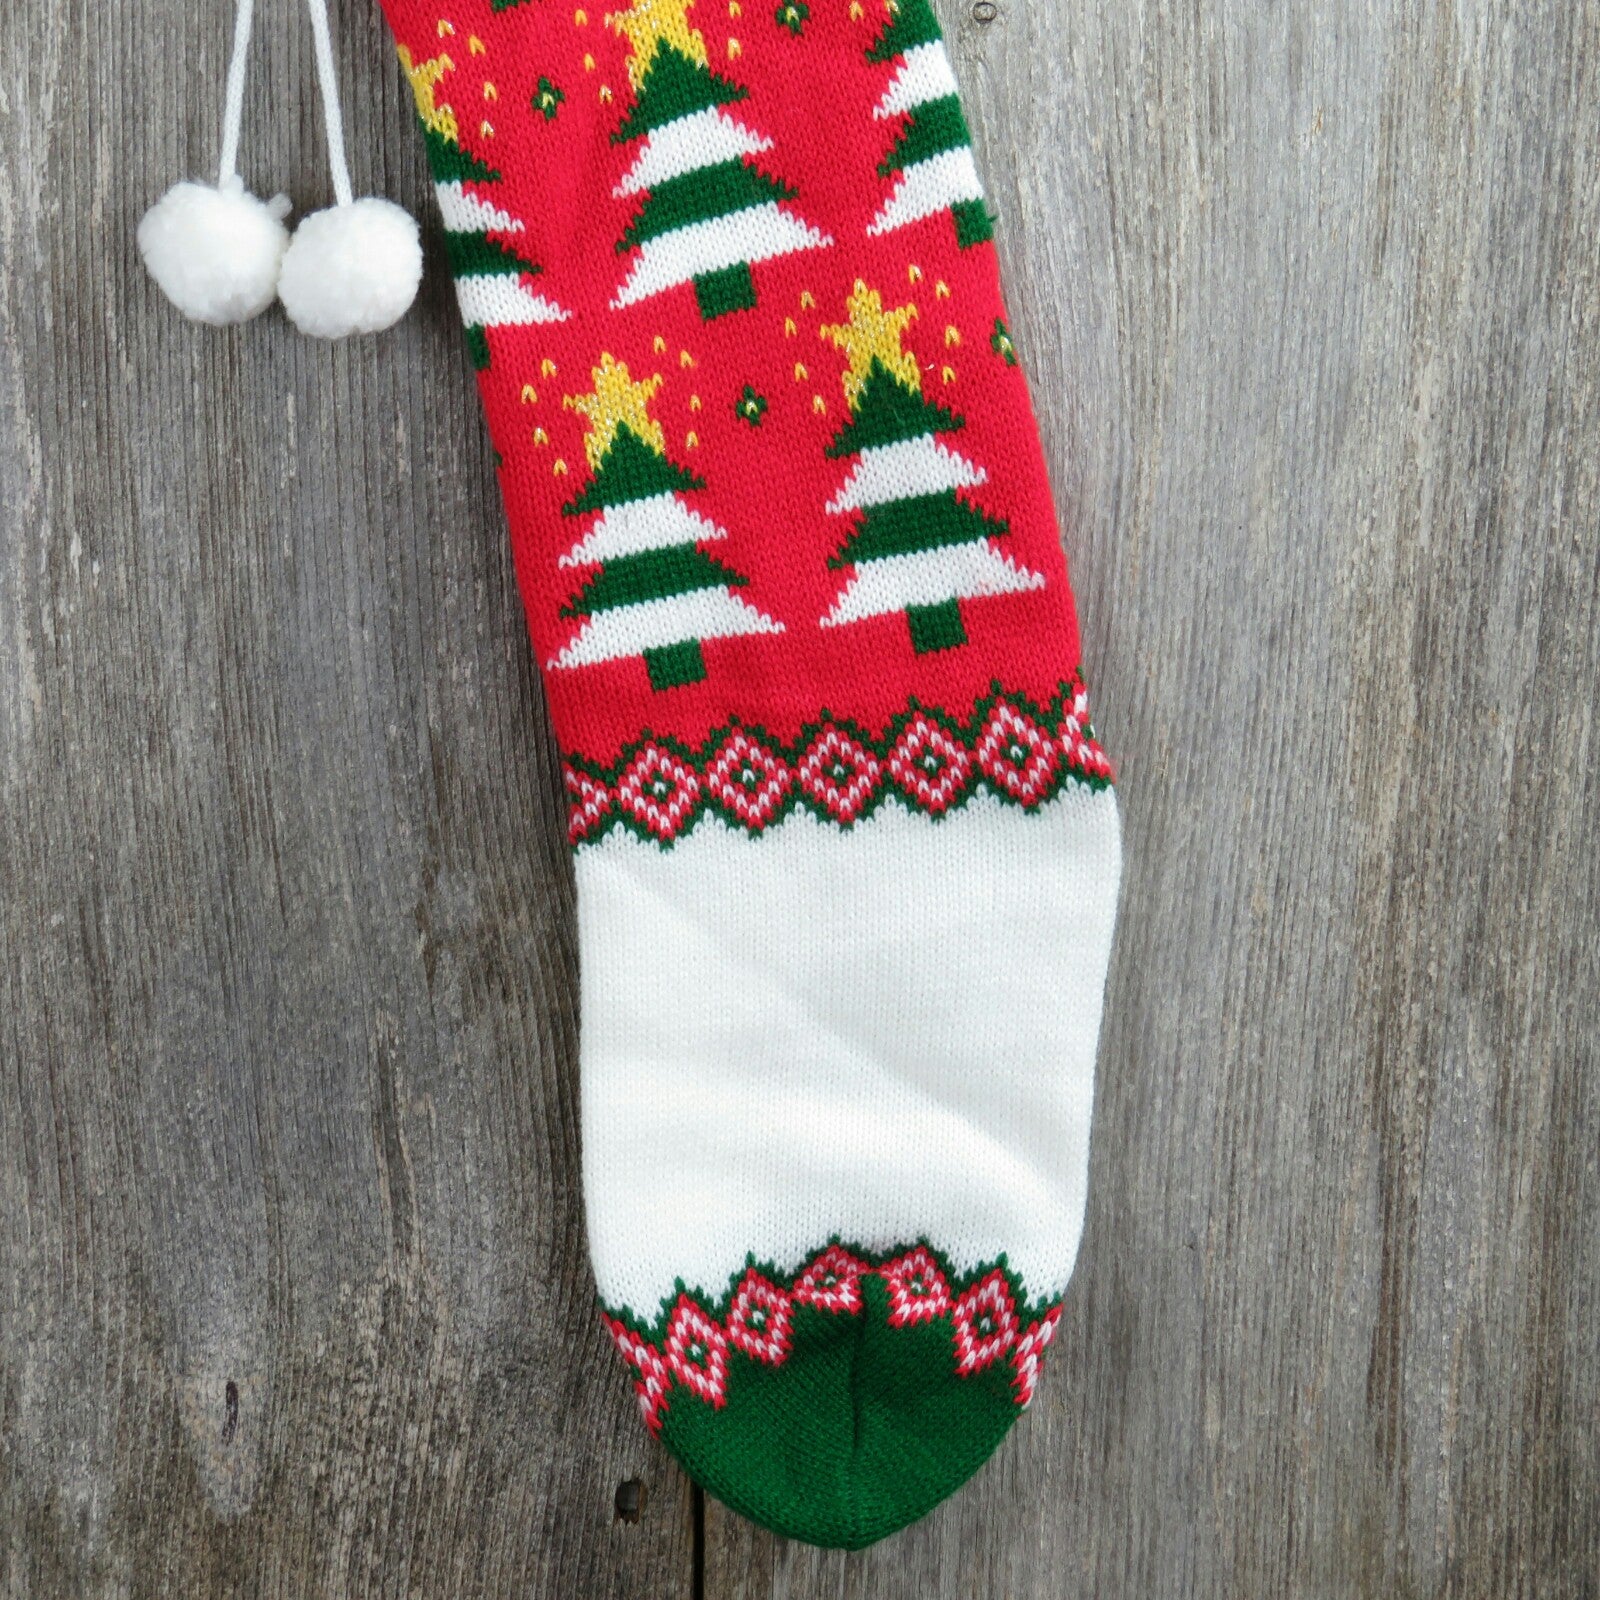 Vintage Tree Striped Stocking Knit Red Green Christmas Knitted Star White Poms Holiday Decor 1980s - At Grandma's Table